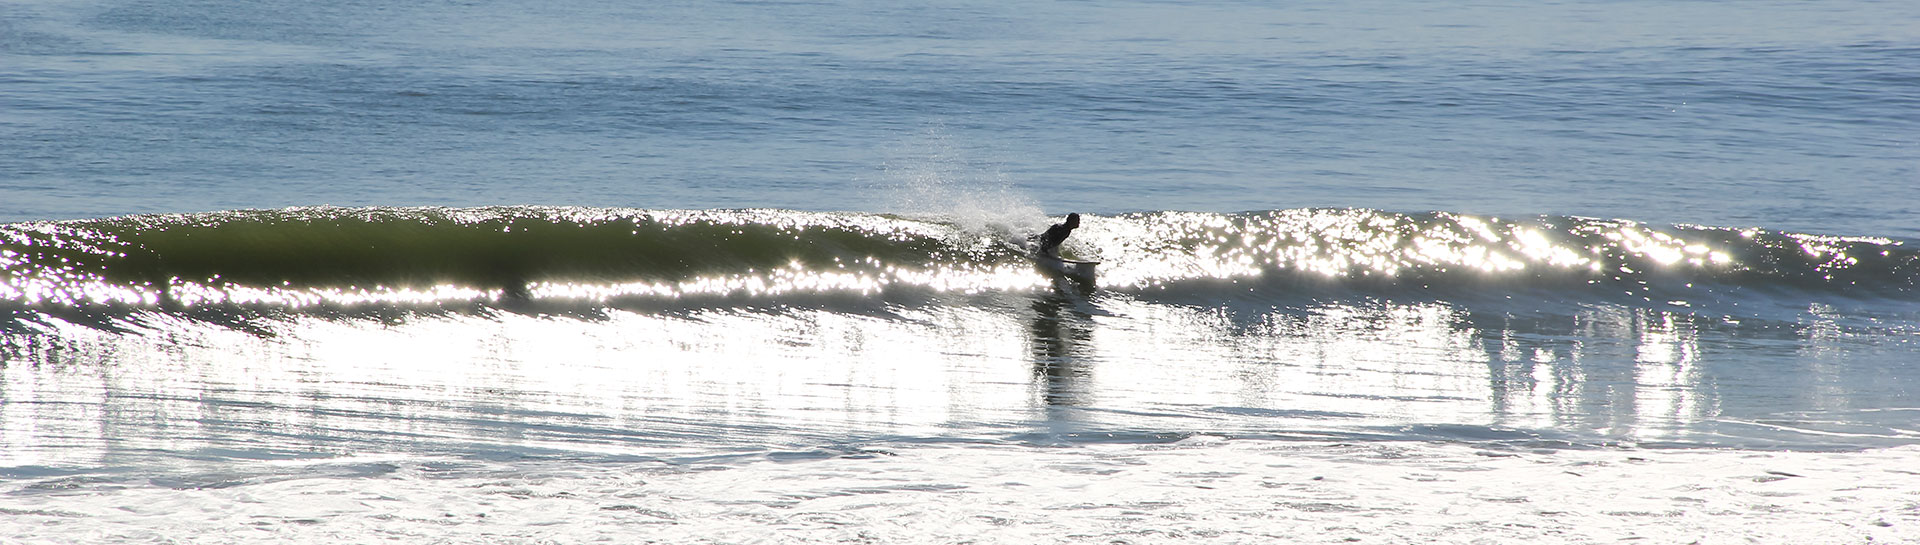 Surfer Riding a wave in Ocean city maryland